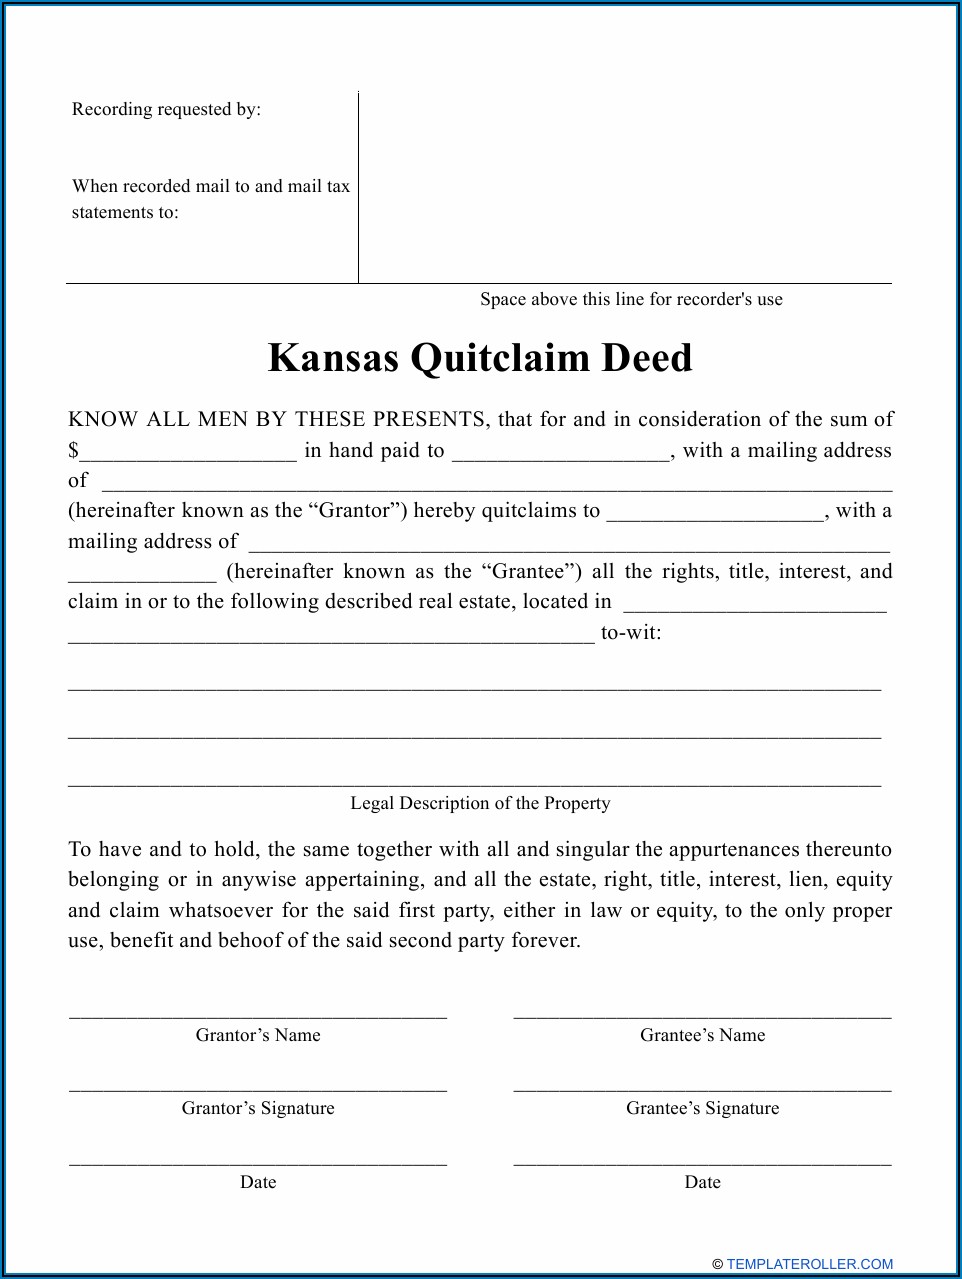 Where Can I Buy Quit Claim Deed Forms